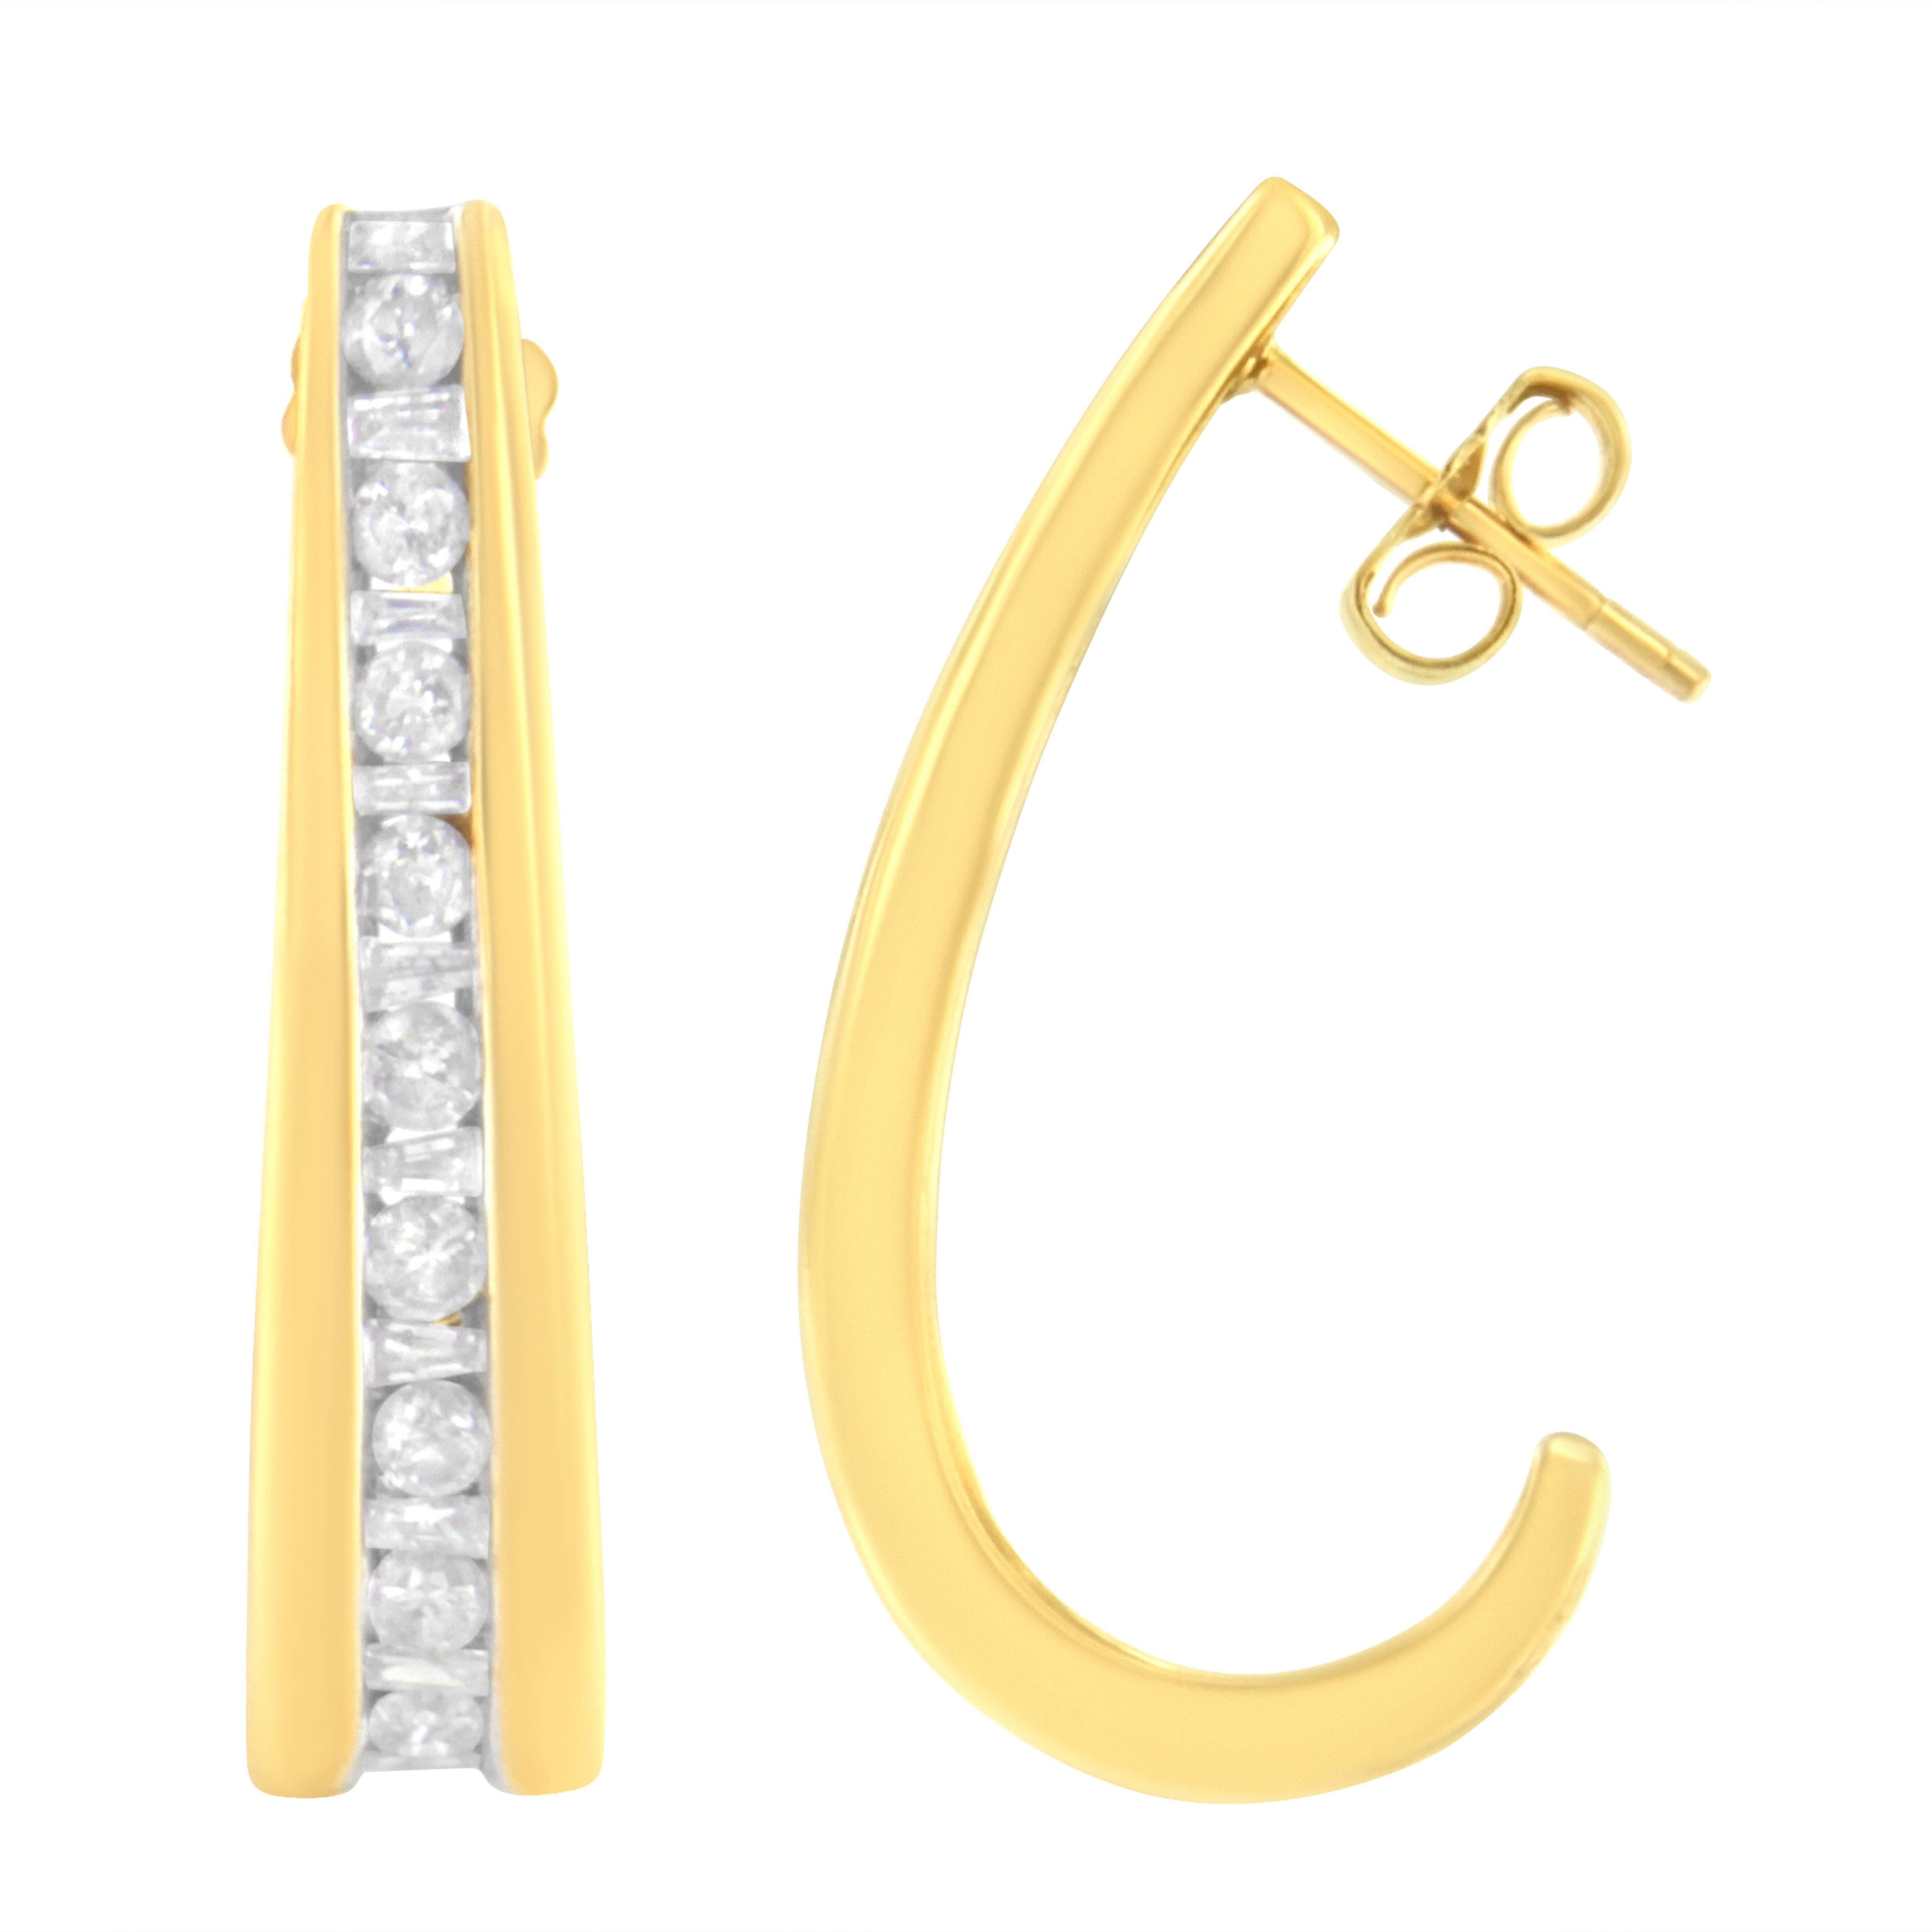 Simple and elegant, these diamond J hoop earrings are perfect for any occasion. Created in 10k yellow gold, this design features sparkling round and baguette cut diamonds that alternate and inlay the front edge of the hoop. This piece captivates